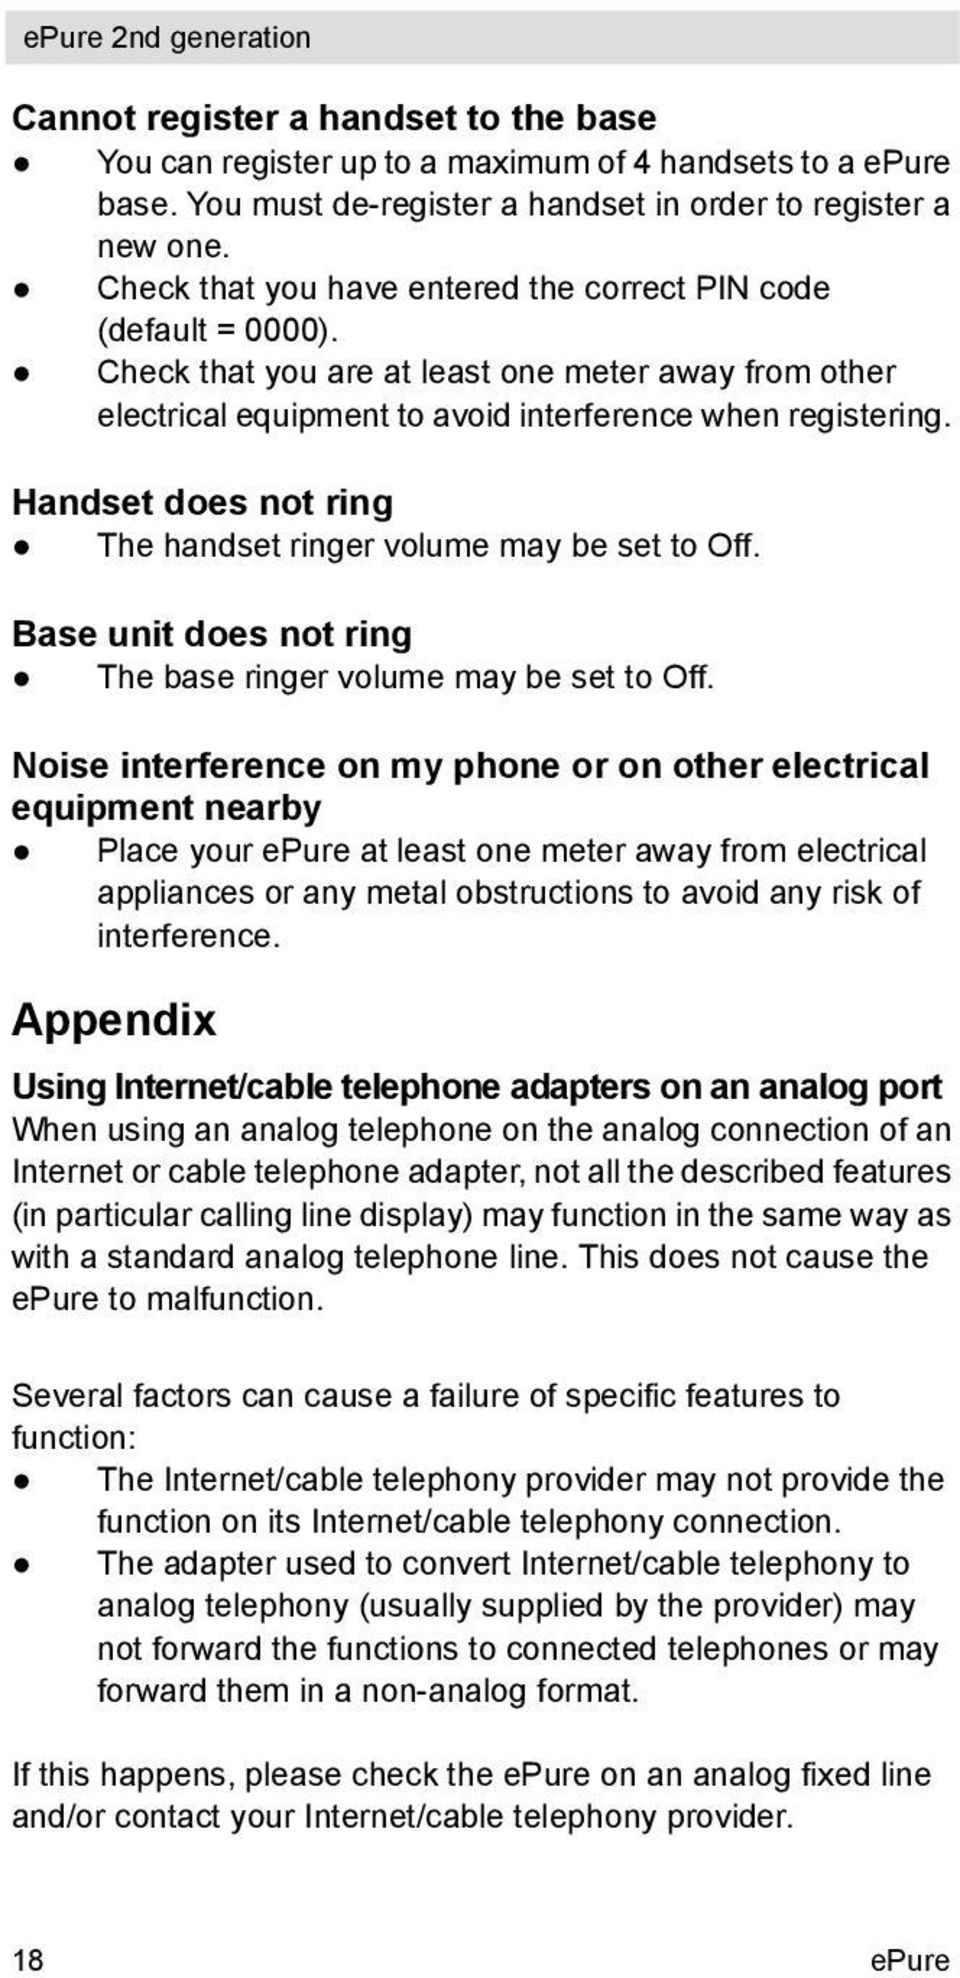 Handset does not ring The handset ringer volume may be set to Off. Base unit does not ring The base ringer volume may be set to Off.